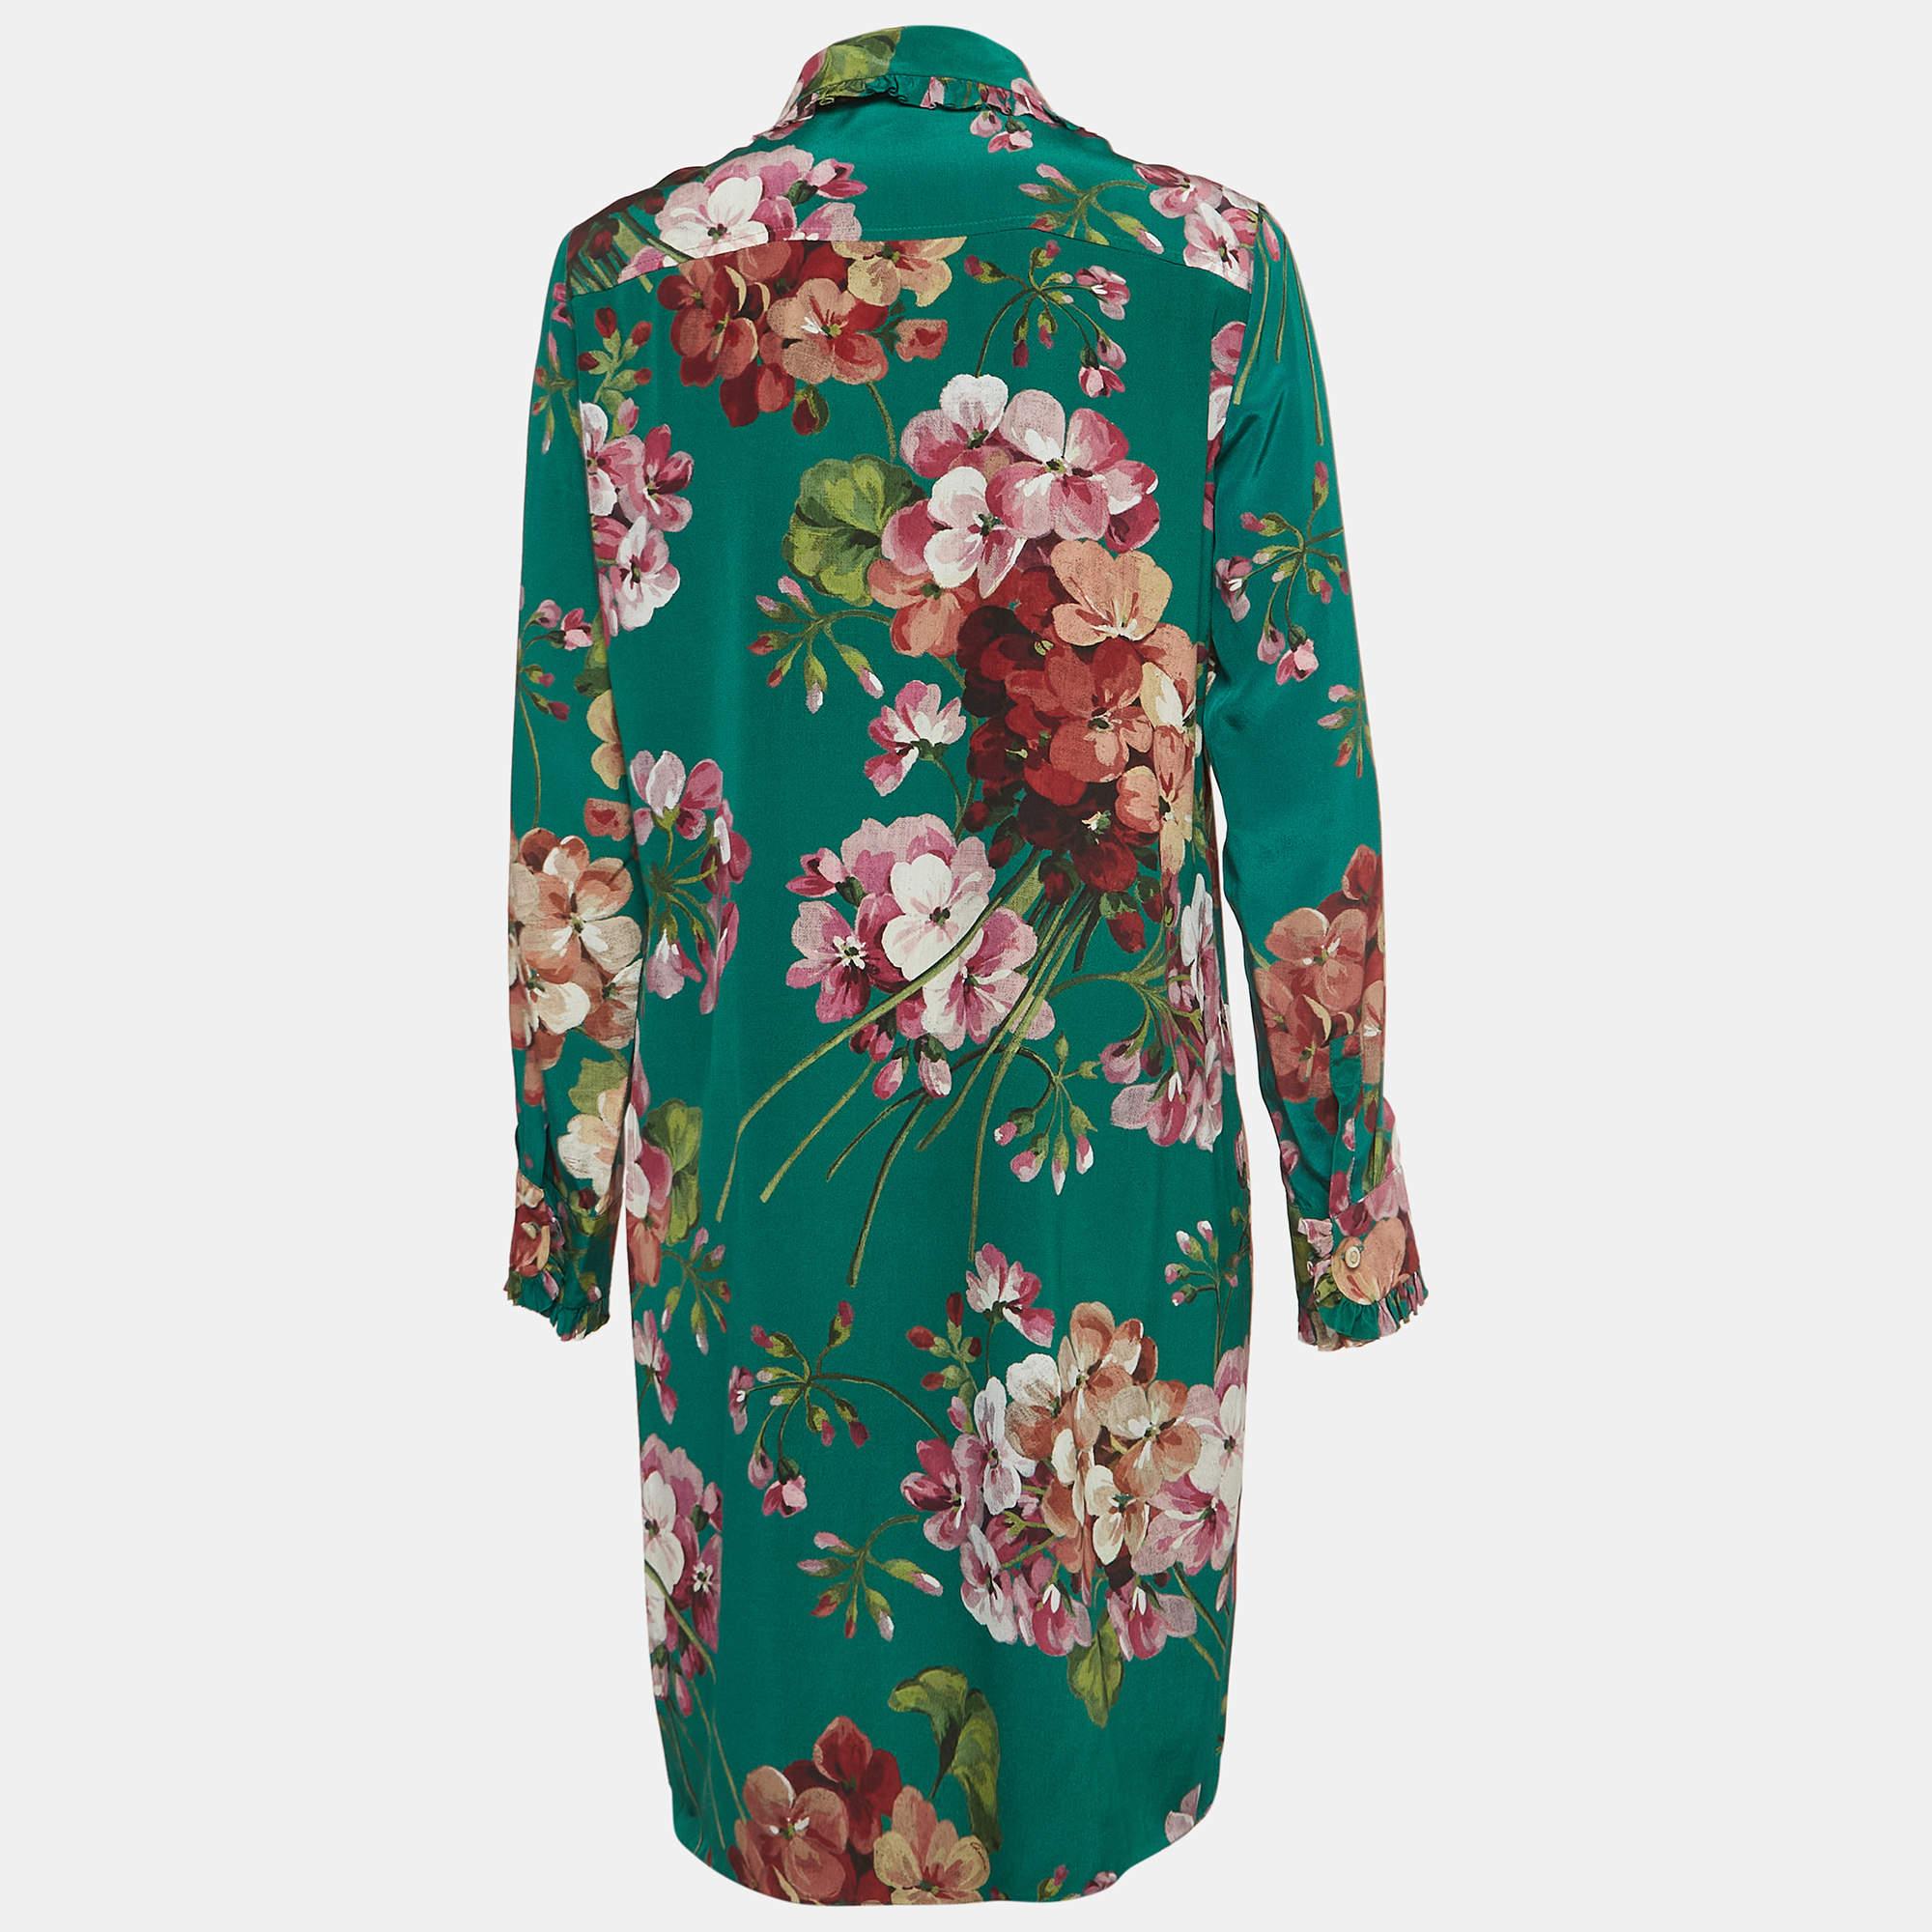 Draped in luxurious silk, the Gucci dress exudes effortless charm. Delicate floral motifs dance across the fabric, adding a touch of whimsy to its emerald hue. With its relaxed silhouette and refined collar, it effortlessly blends style and comfort